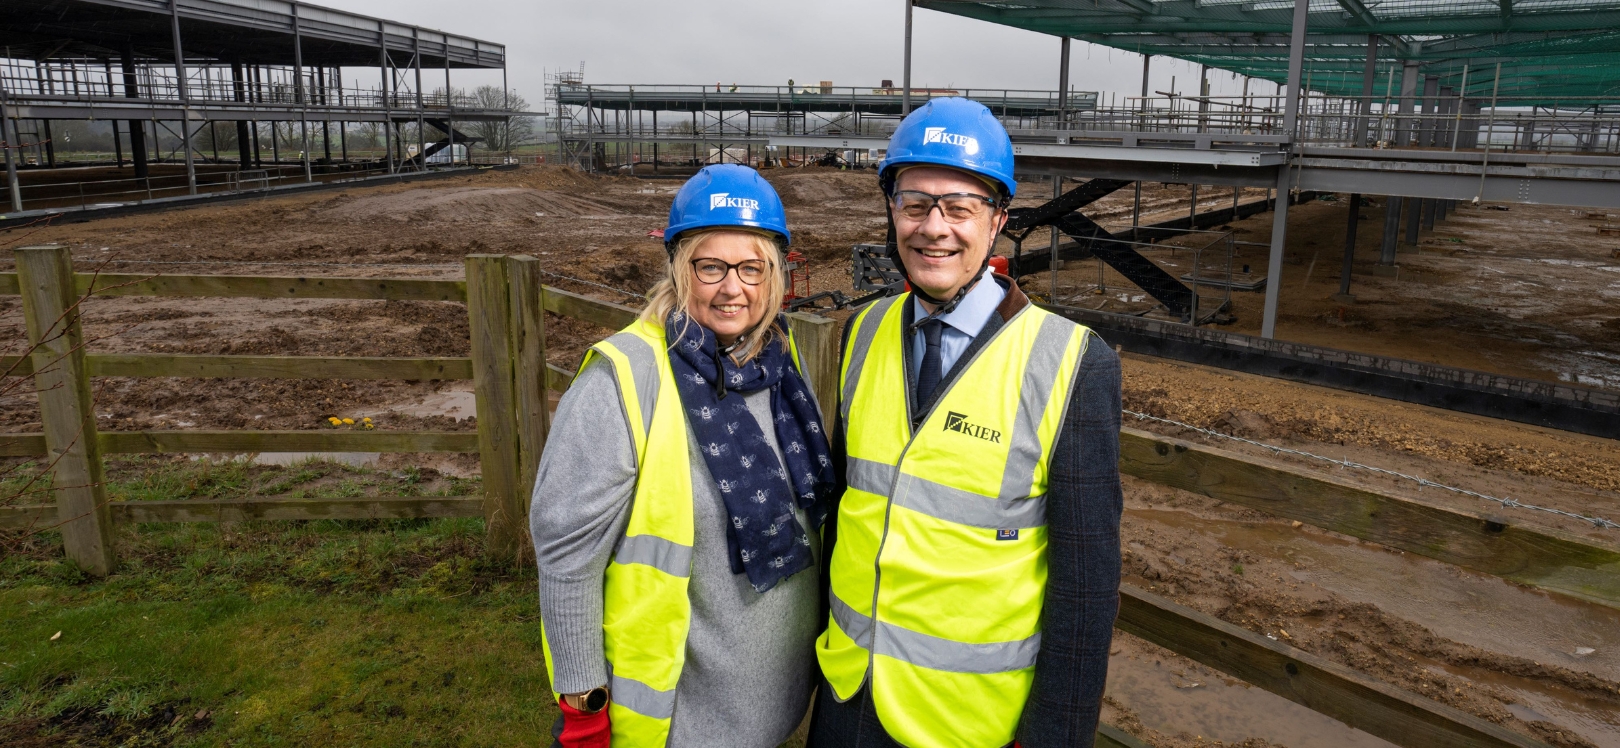 Durham County Council Leader, Cllr Amanda Hopgood, and Newcastle City Council Leader, Cllr Nick Kemp, are pictured at NETPark in Sedgefield, which is currently undergoing a £62million expansion.